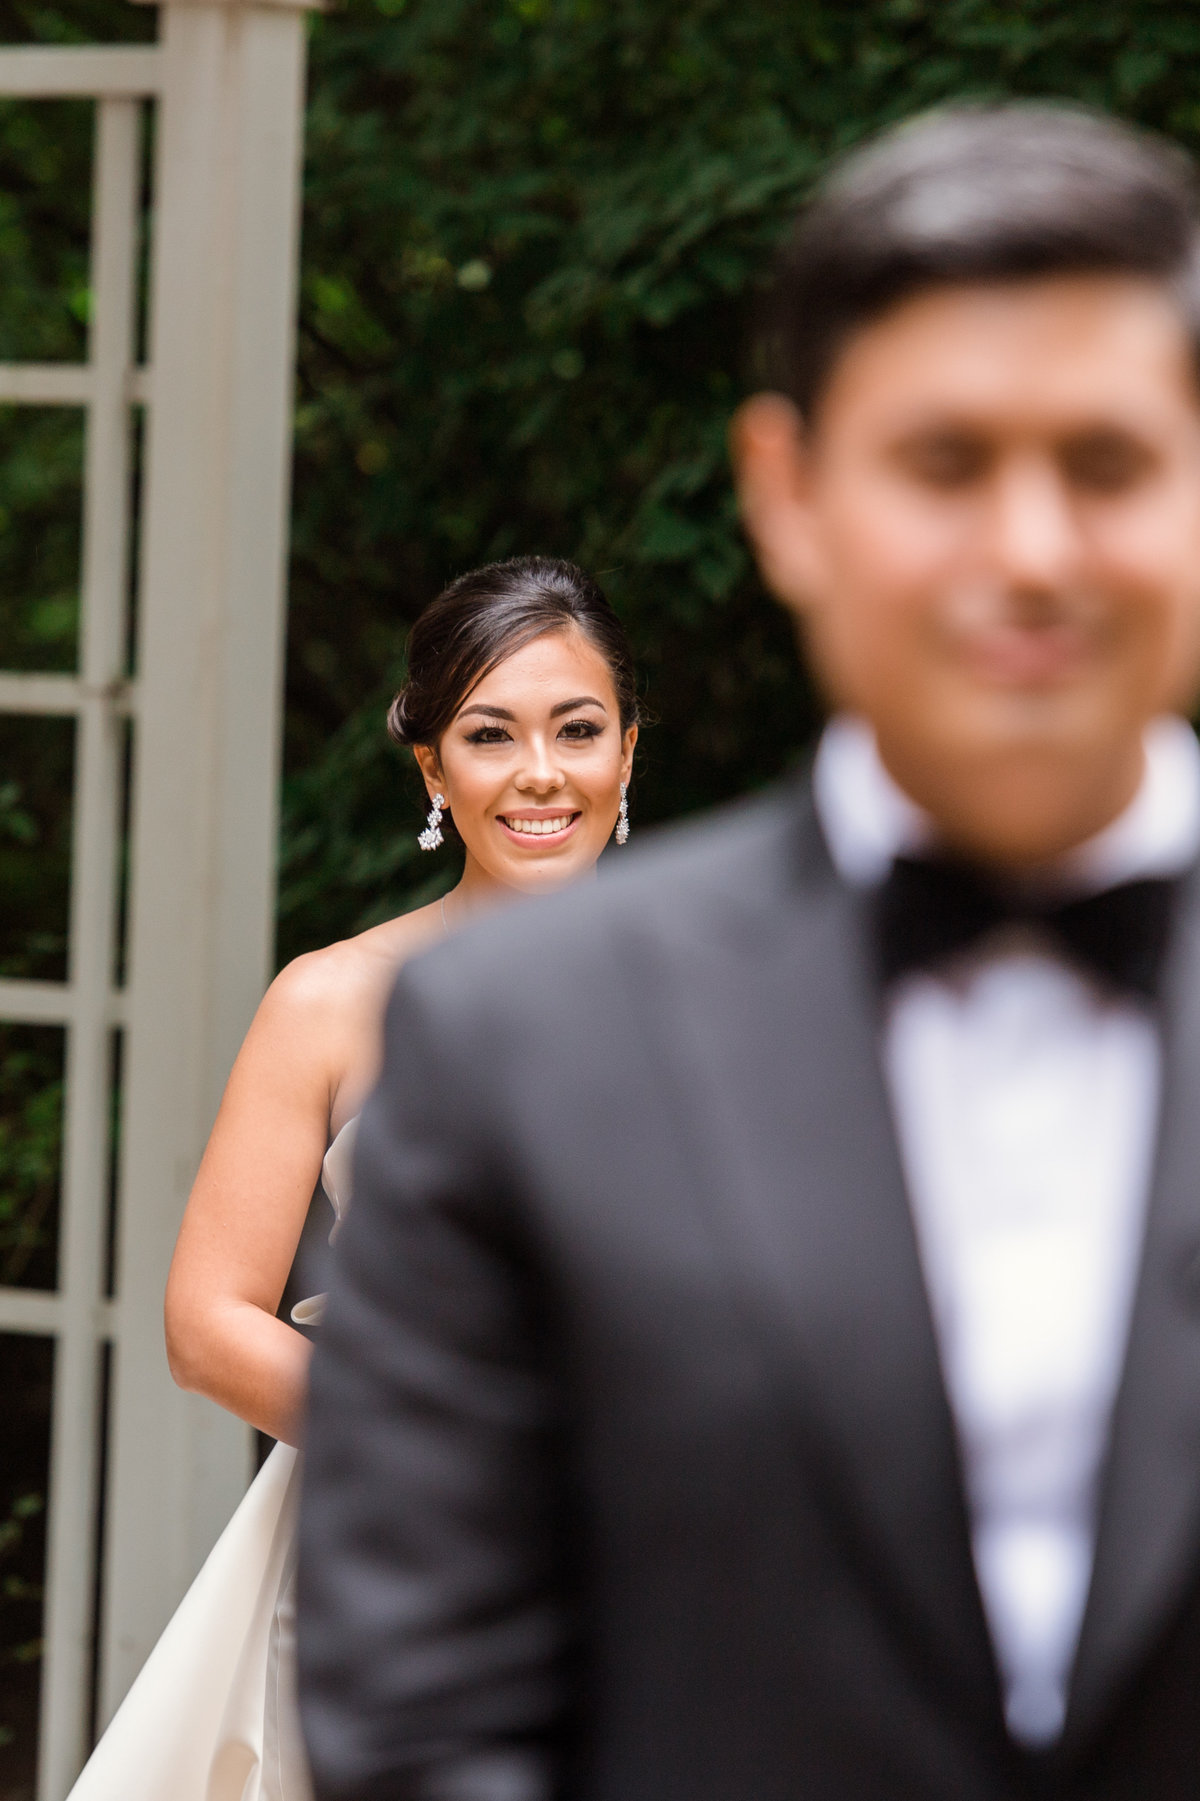 photo of brides smile with groom blurred out before first look during wedding at The Garden City Hotel